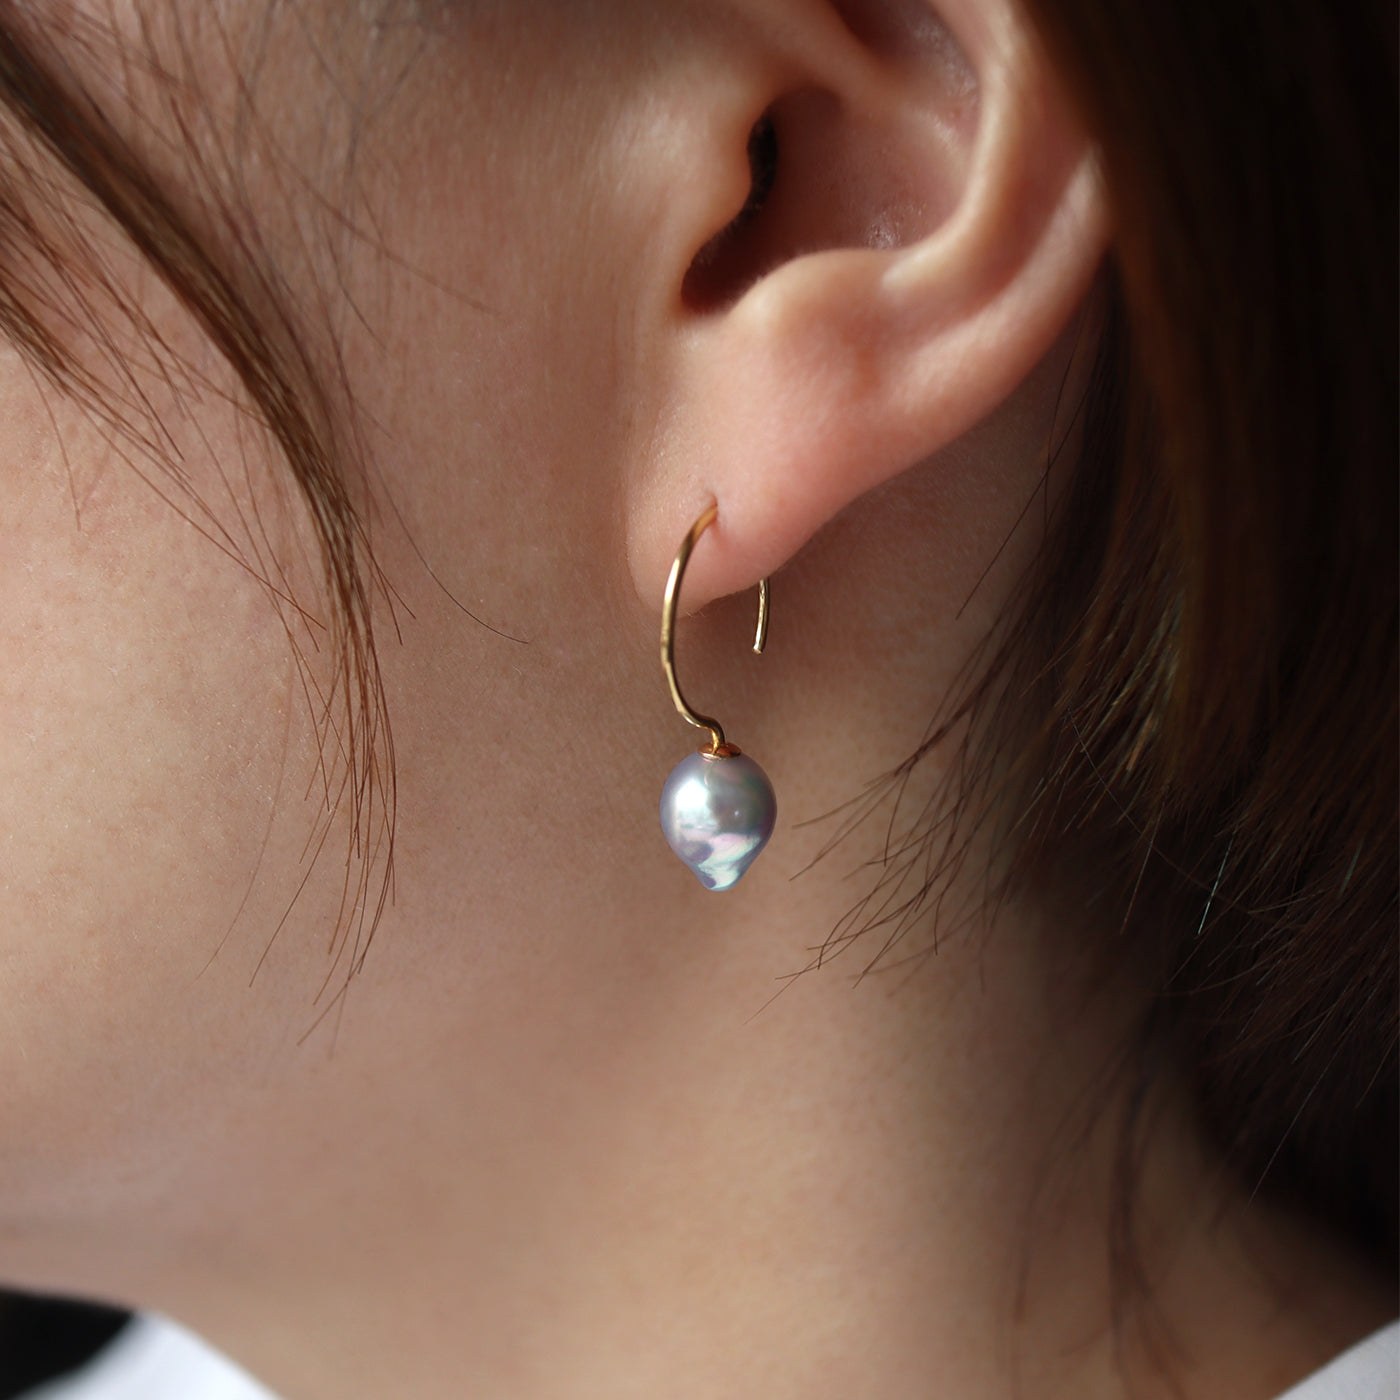 【BASE PARTS】18K YG Stud Earring with Butterfly Backing